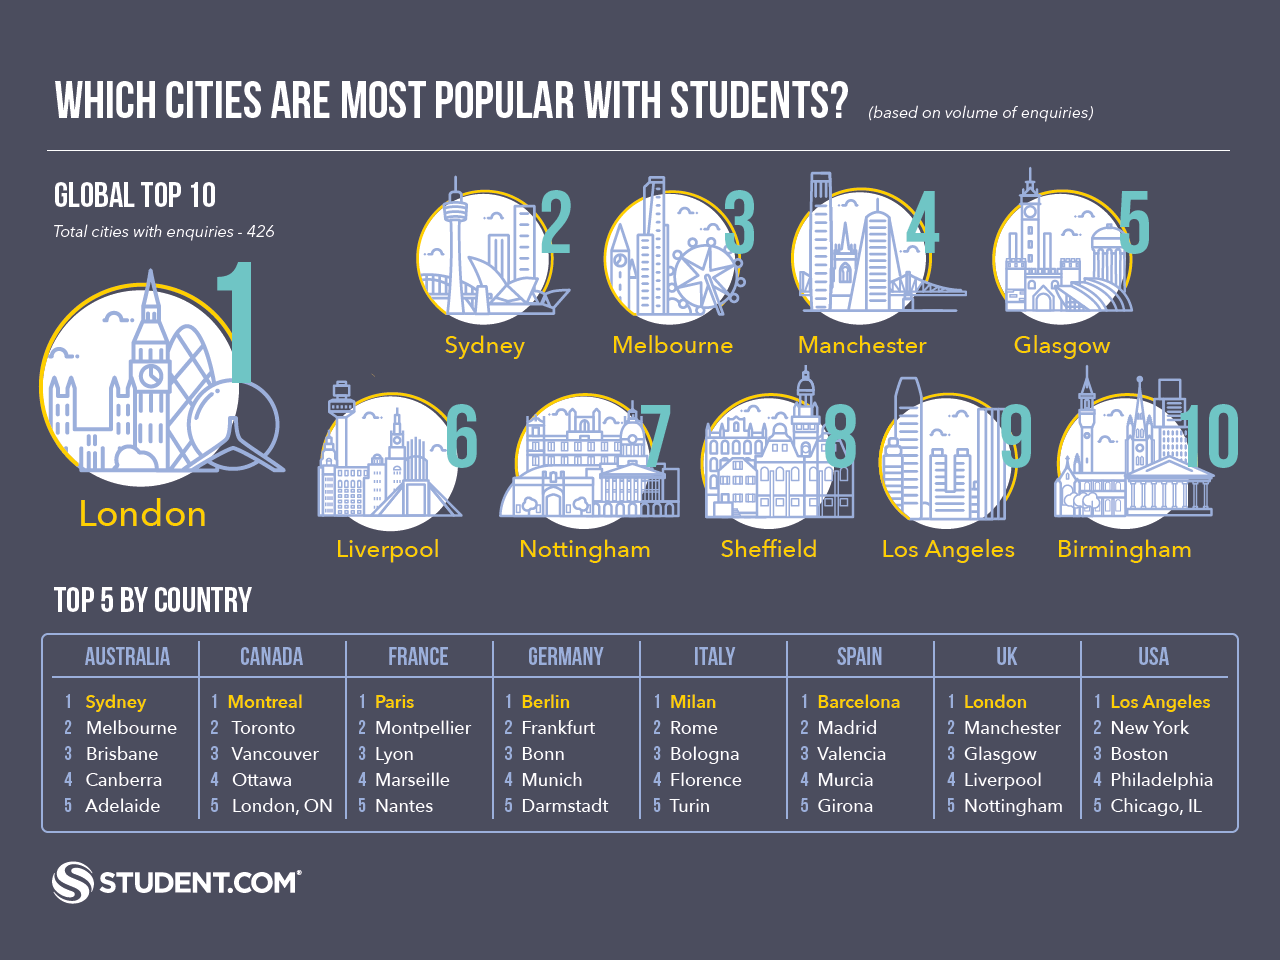 MOST POPULAR STUDENT CITIES